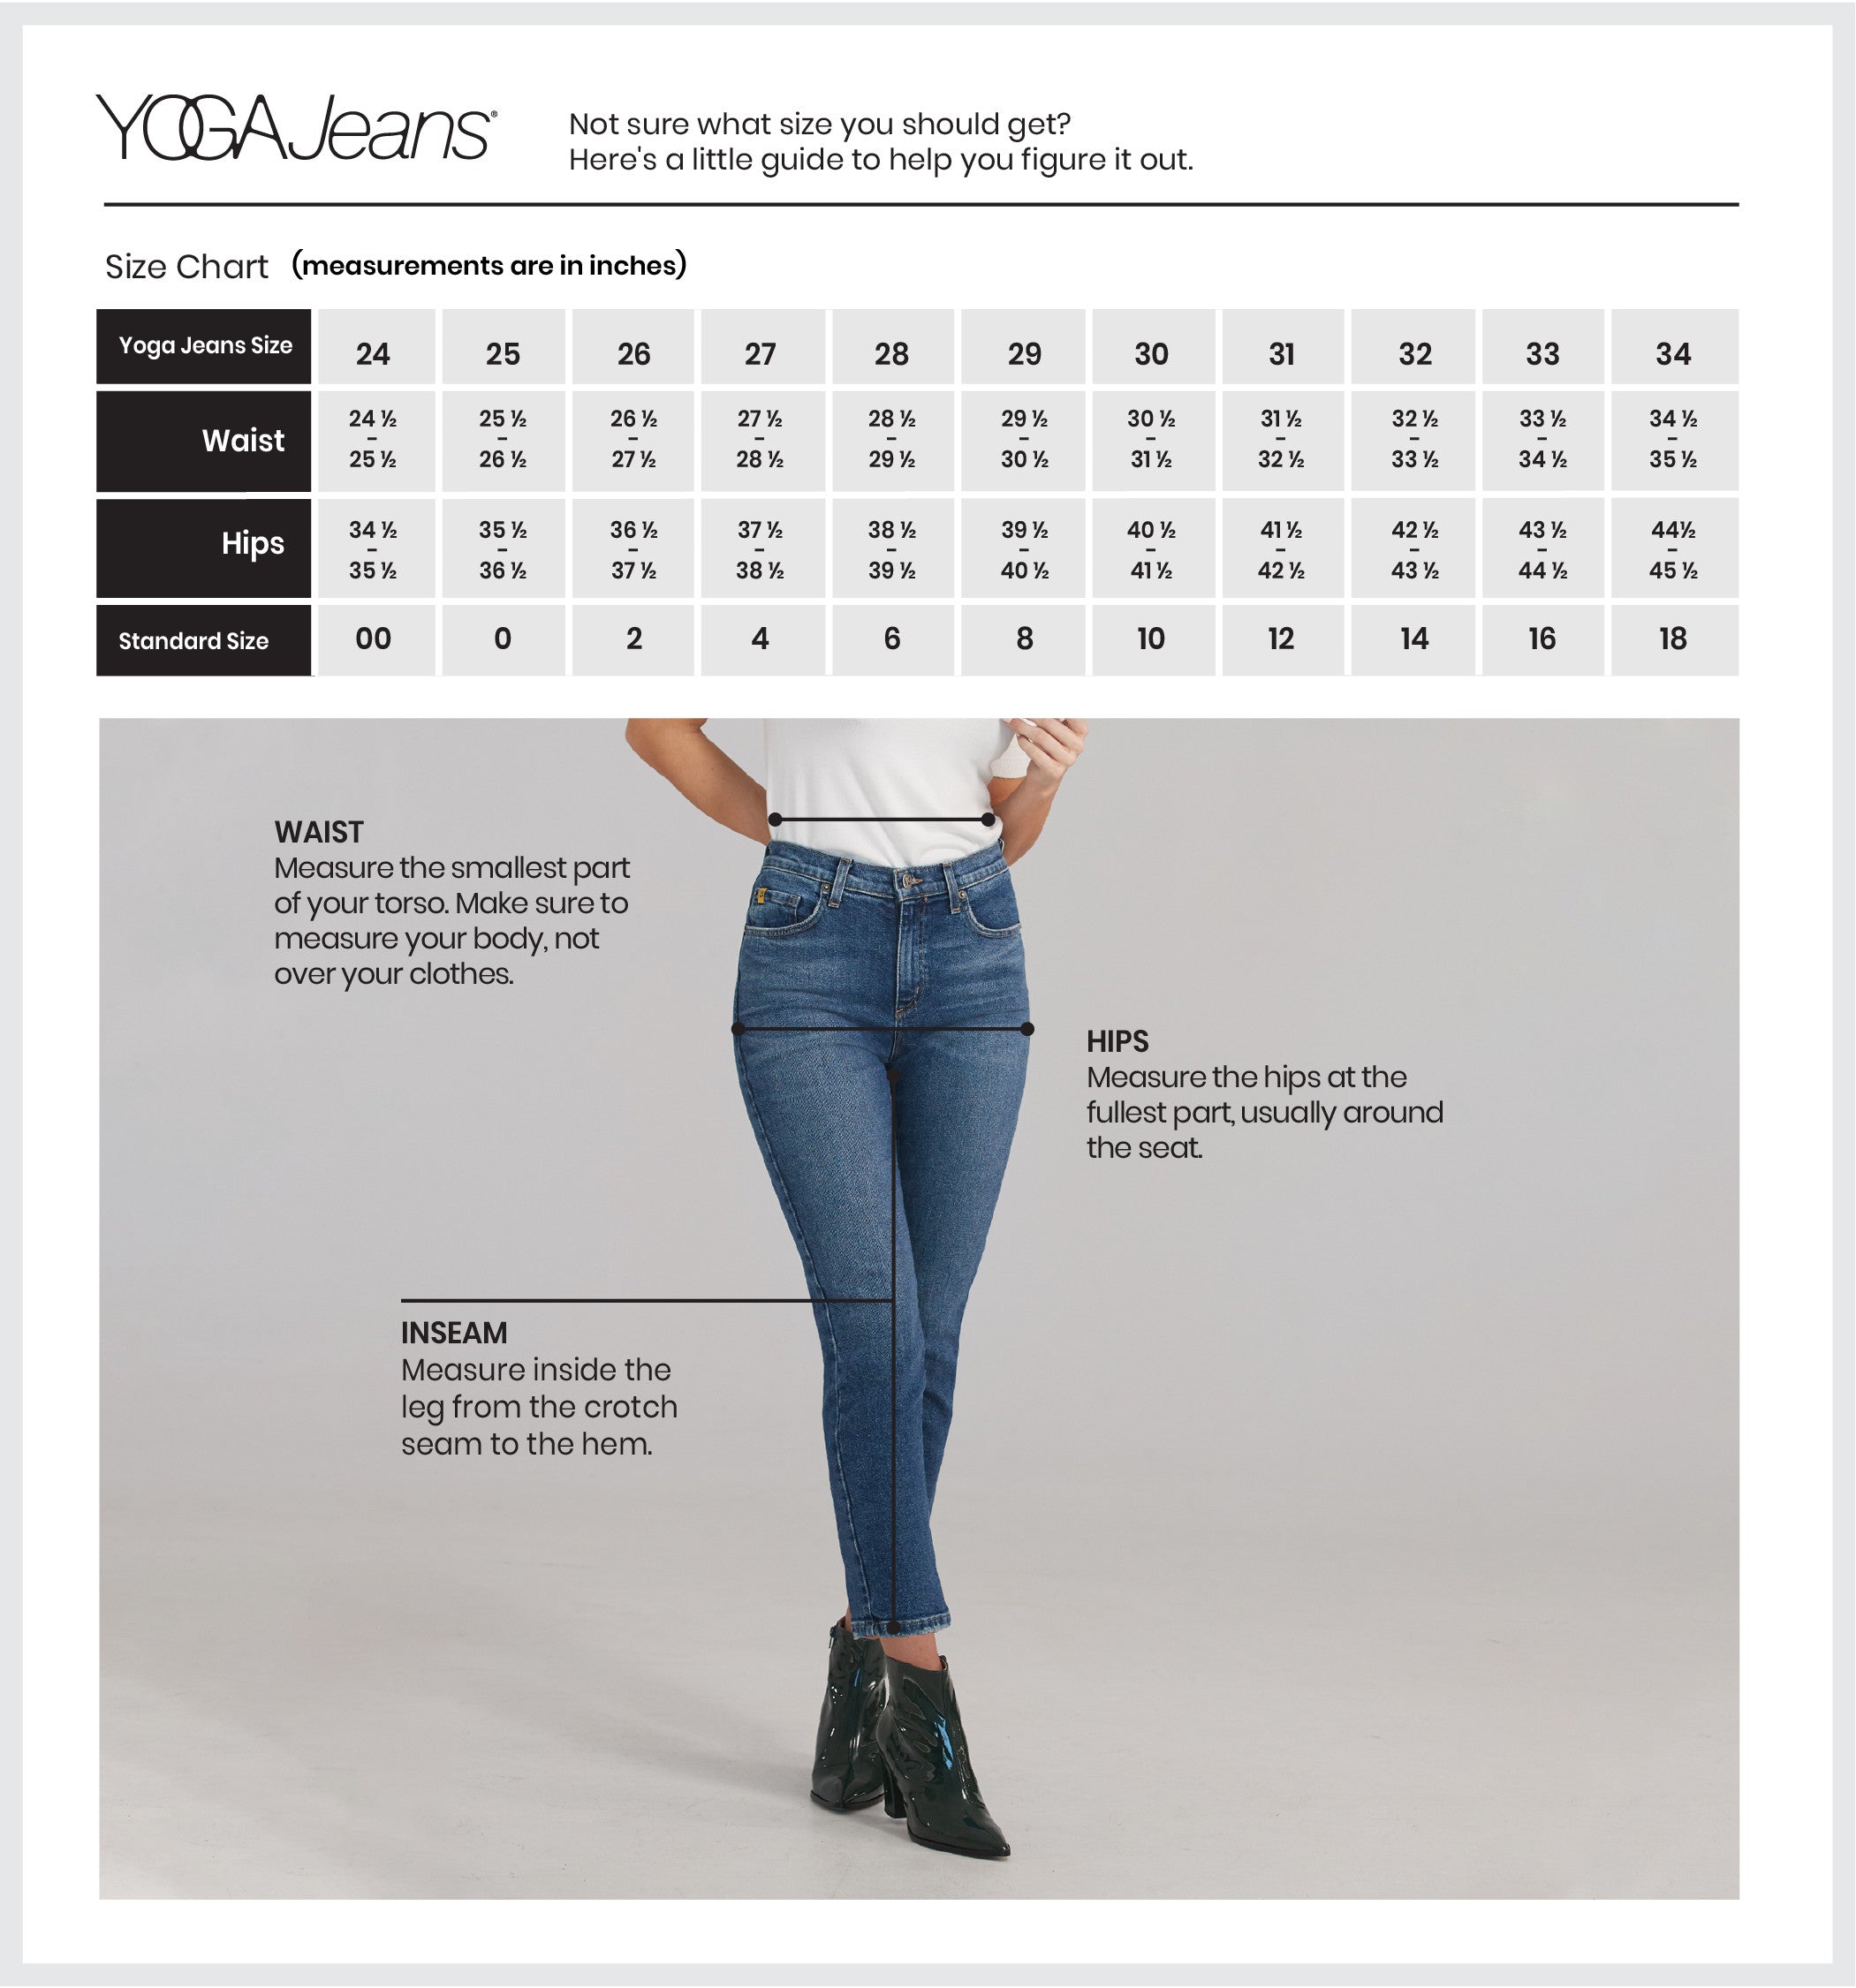 SWP1597NV (High Rise Skinny with 34 inch inseam)